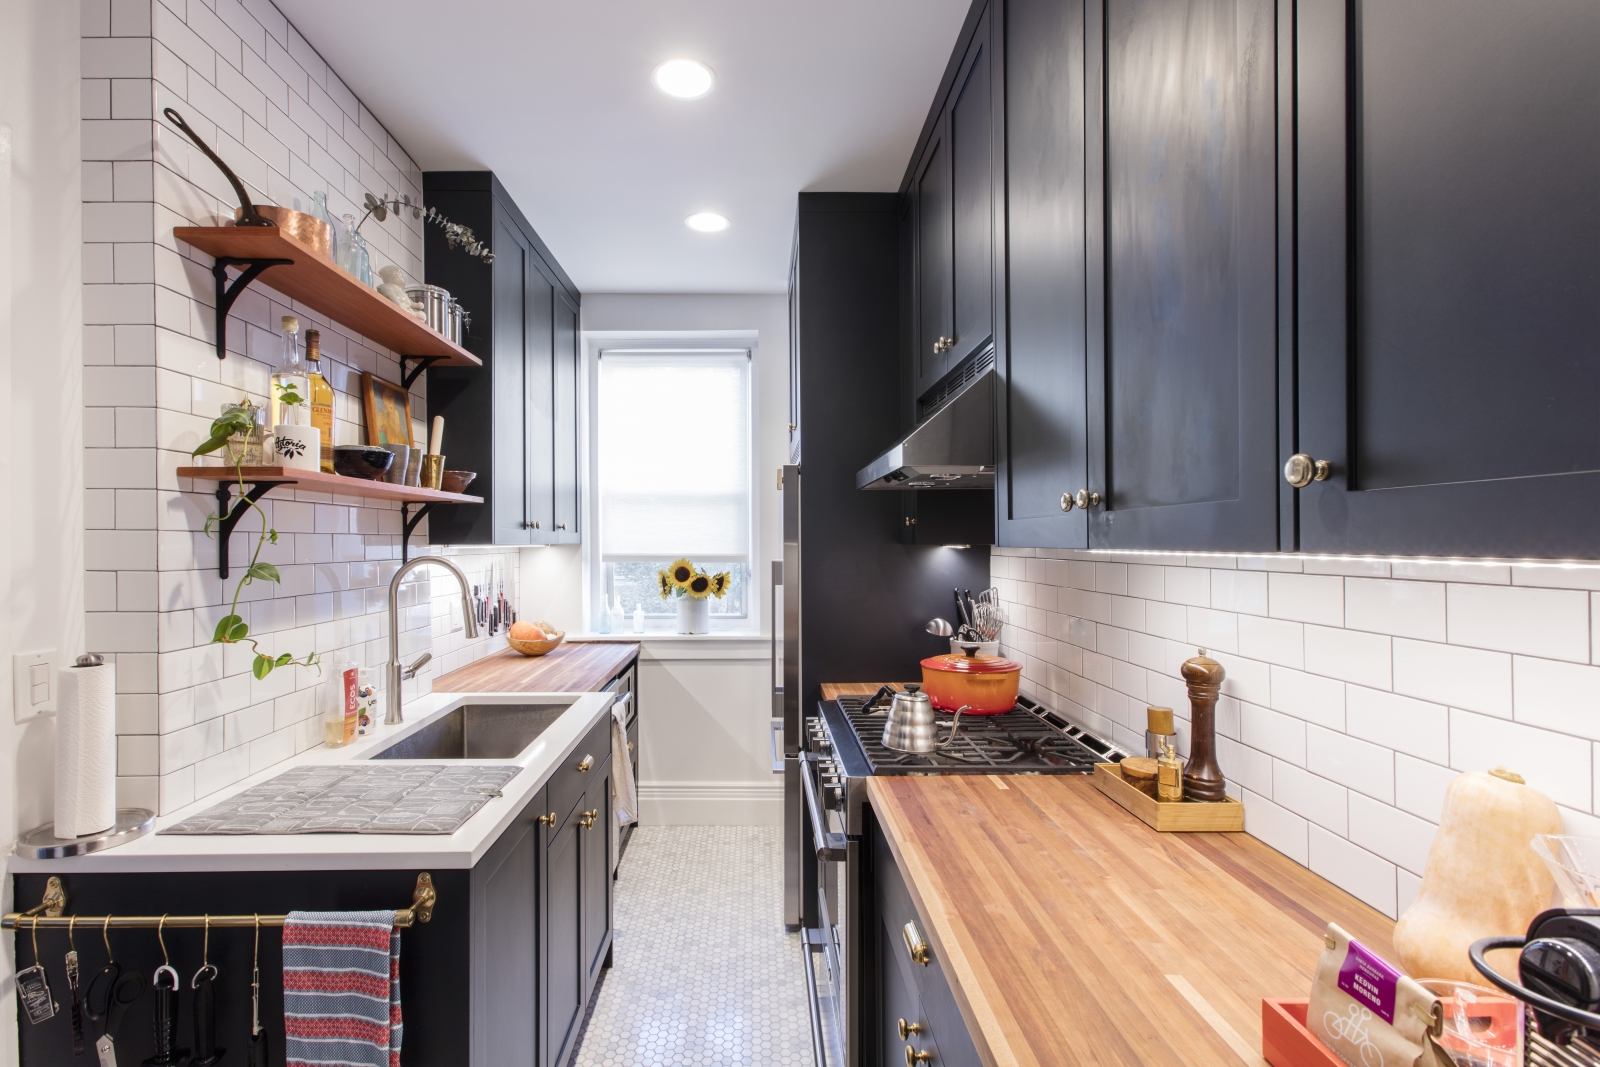 image of open kitchen shelving nyc